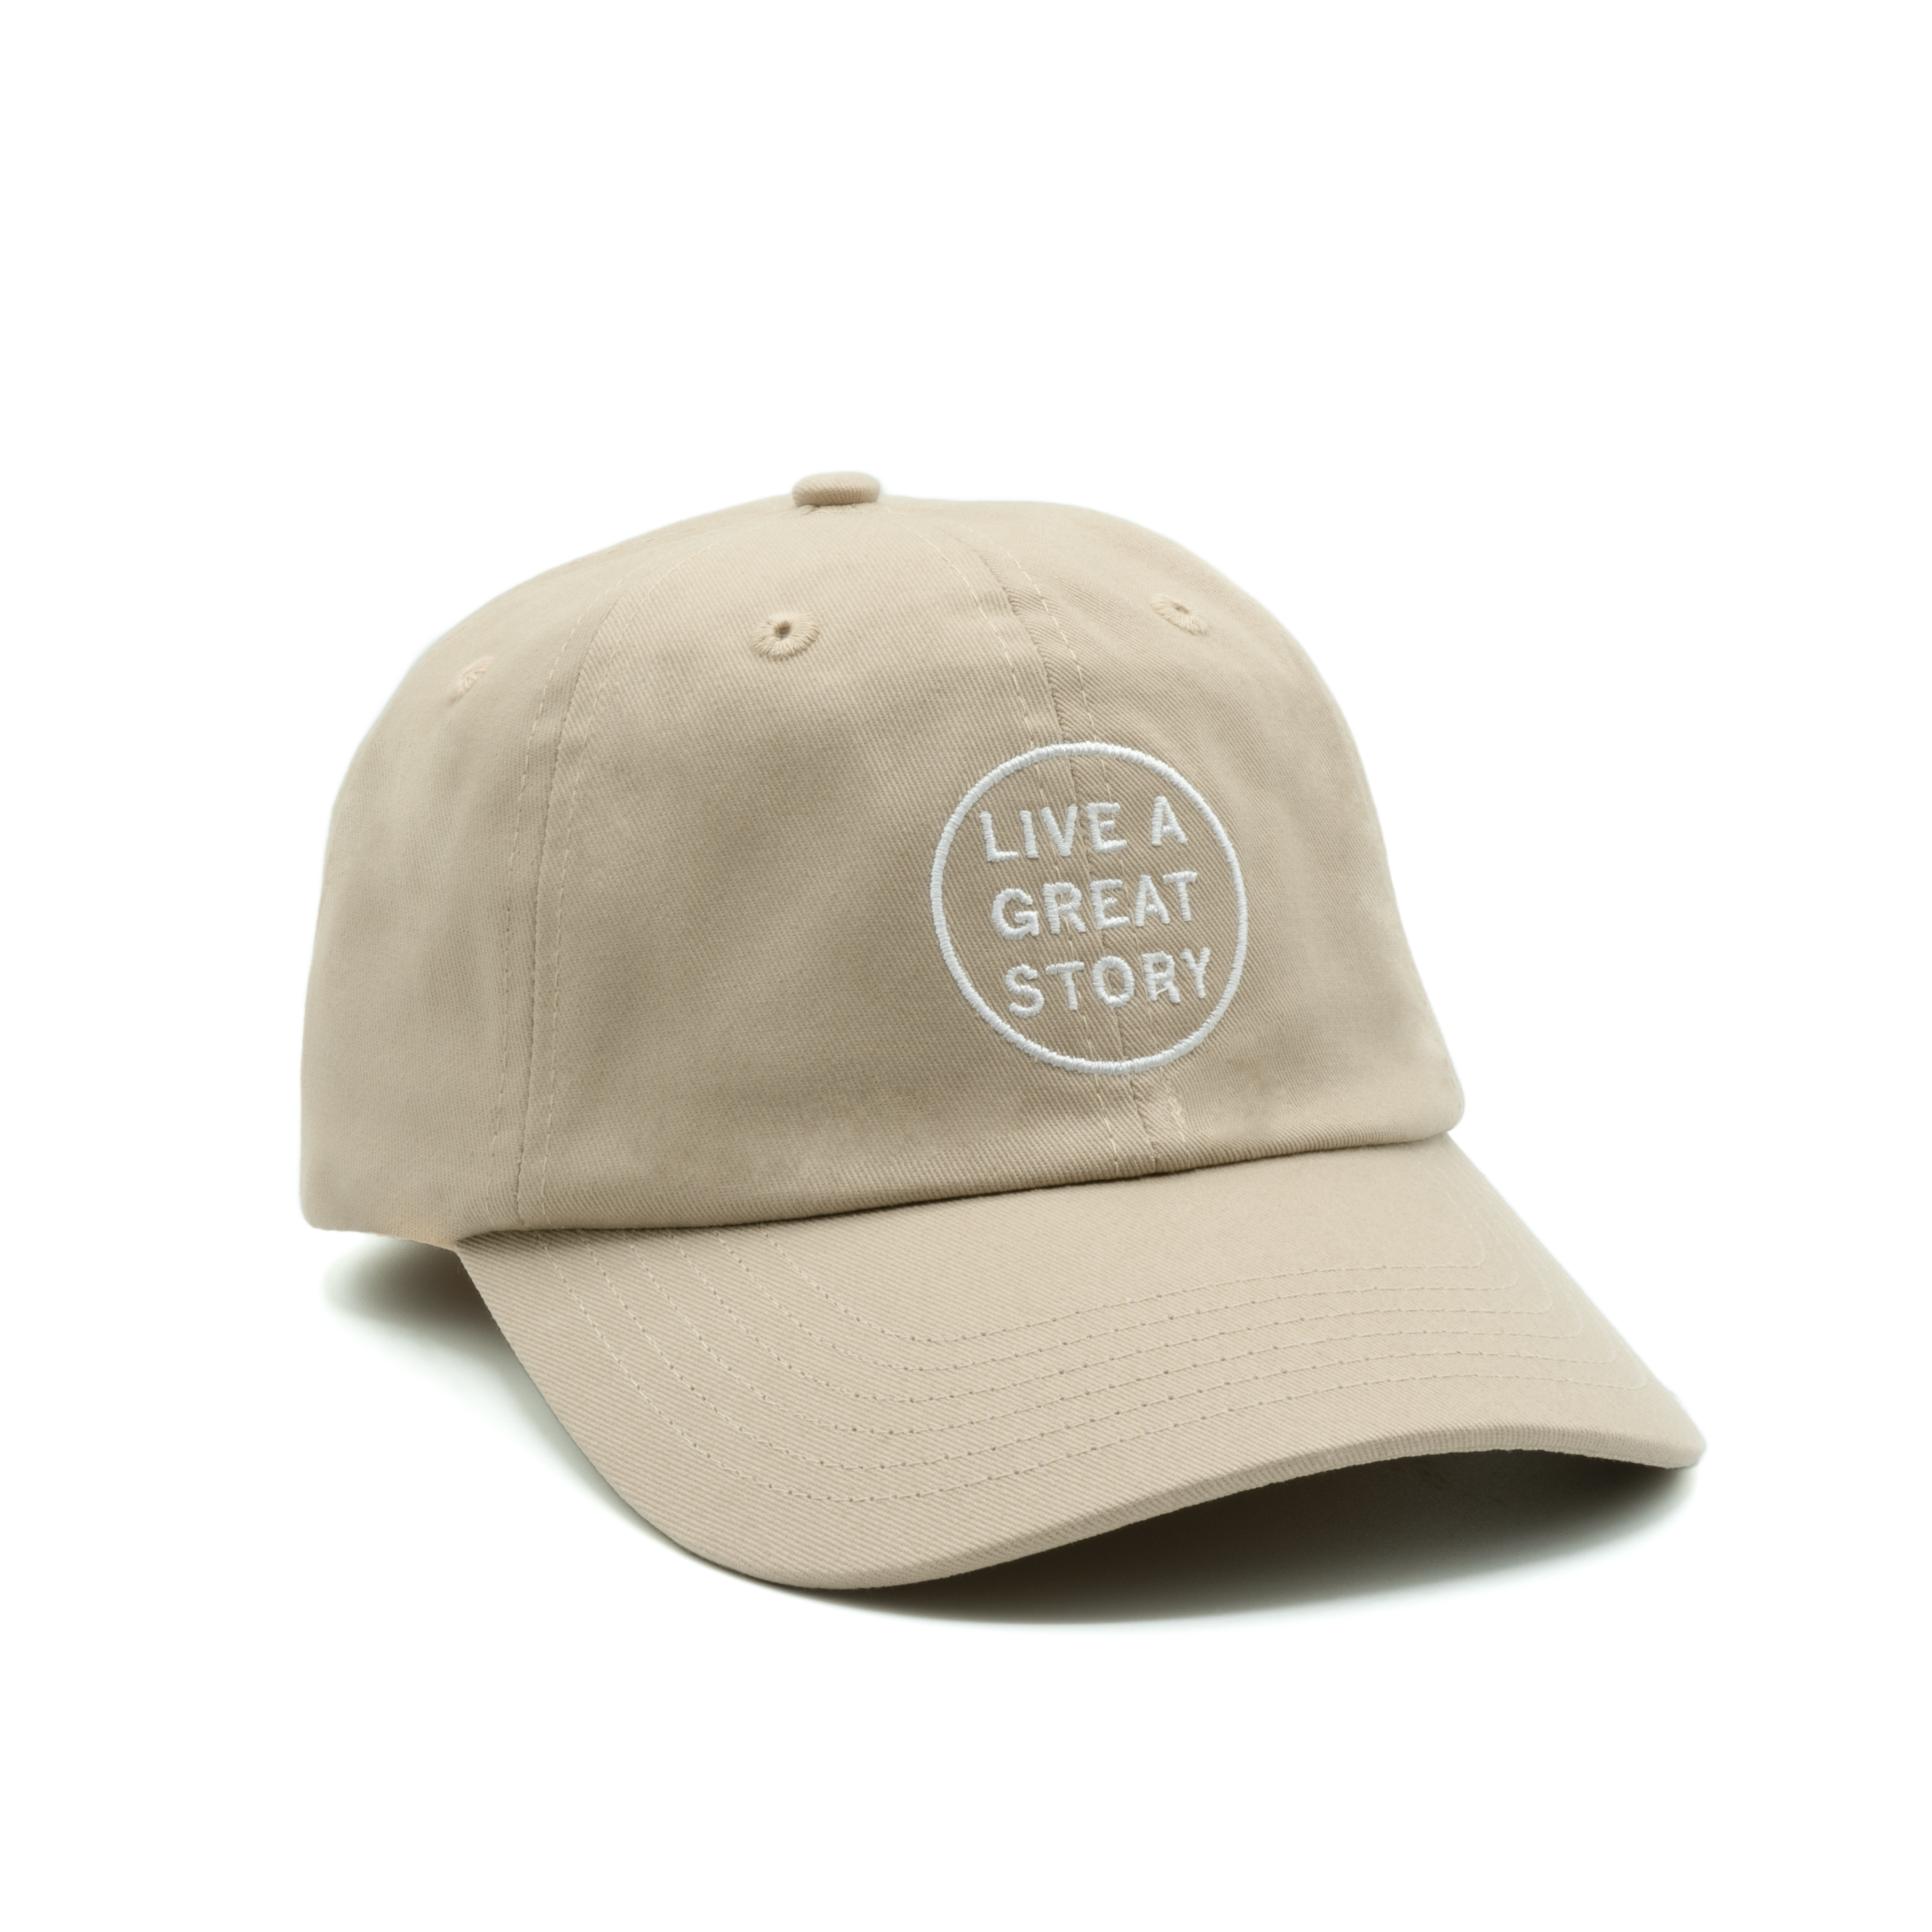 A tan LIVE A GREAT STORY Dad Hat